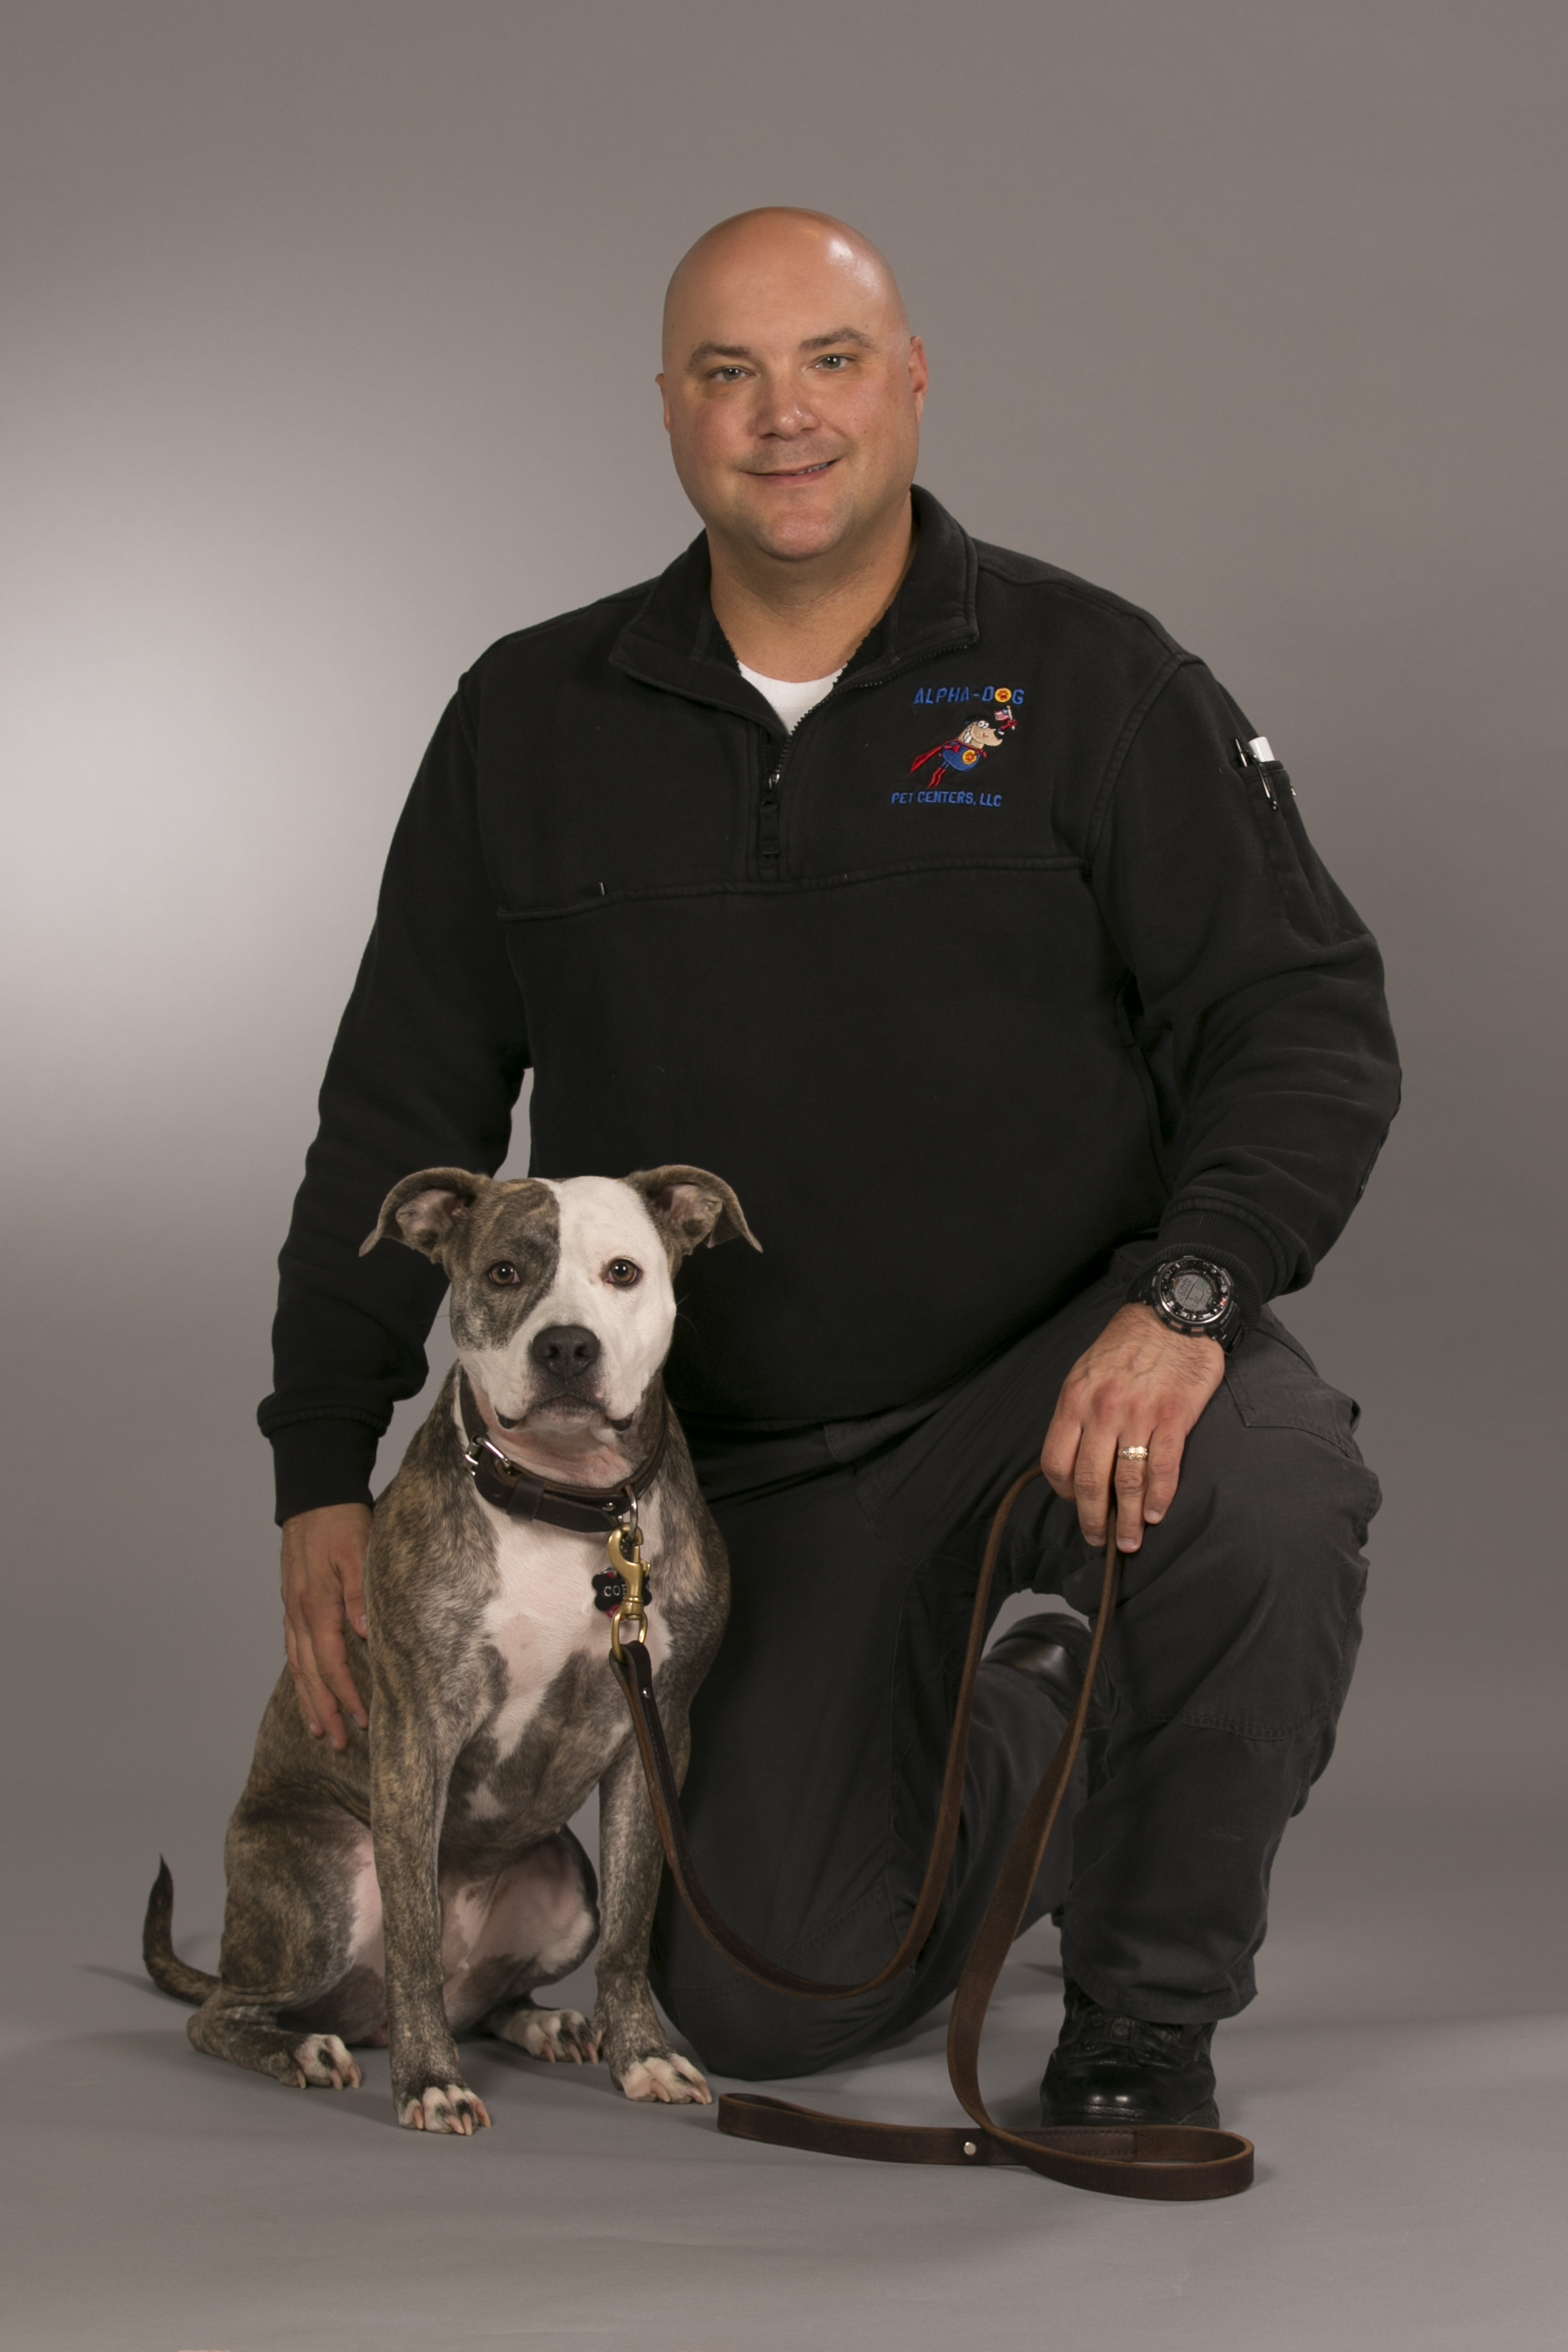 Photo of gray and white dog named Alex with her owner, Chip Ingersoll